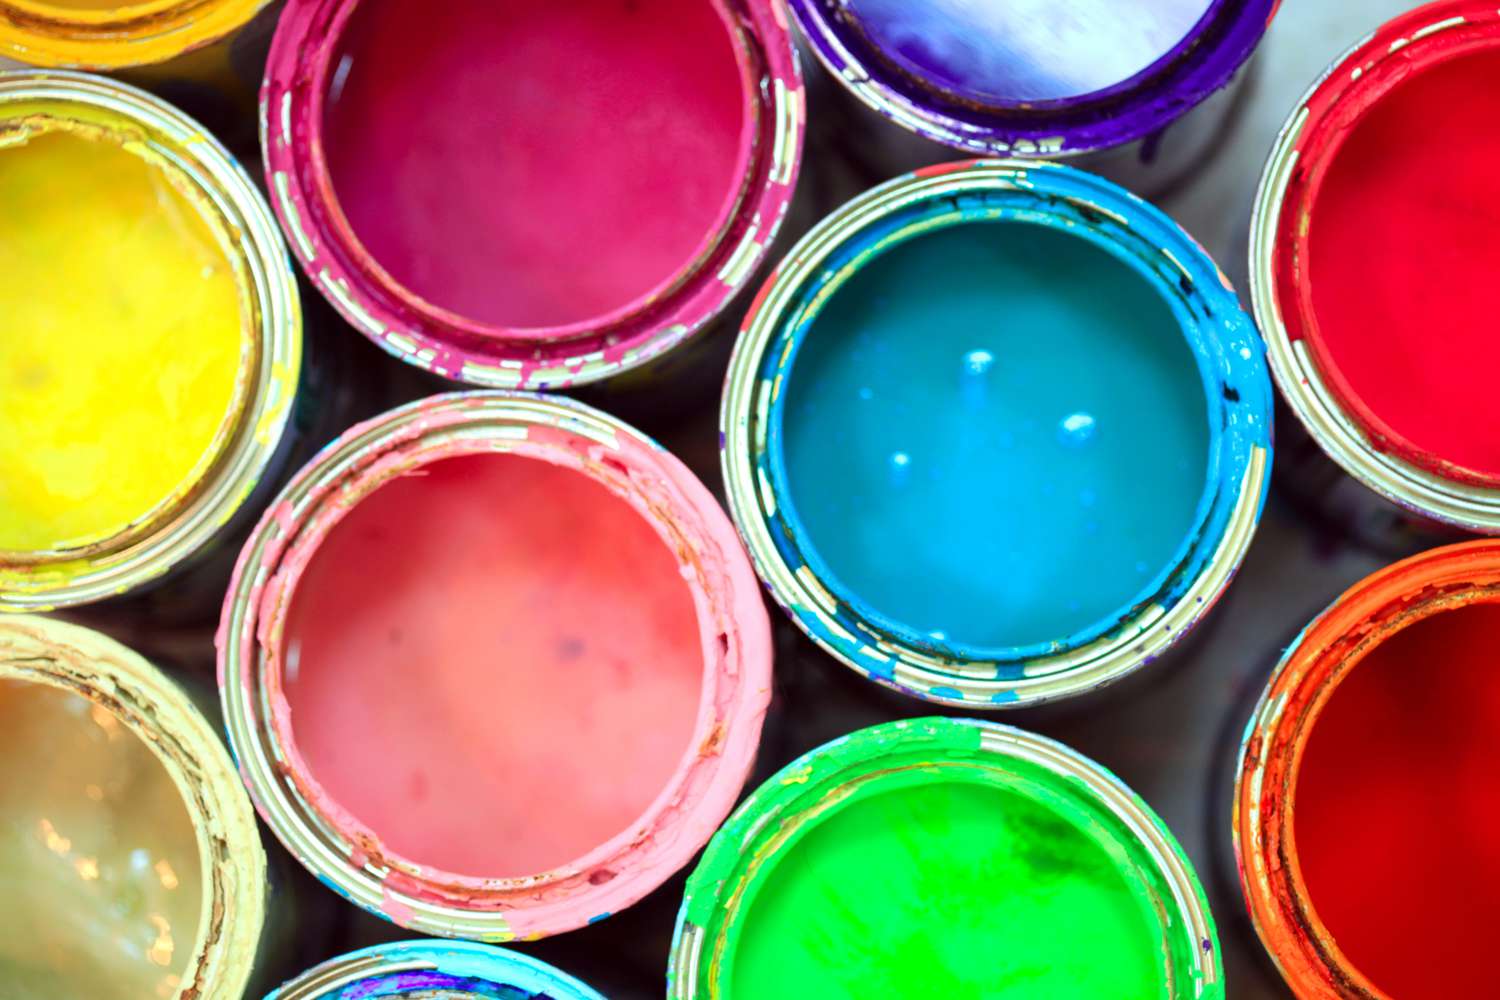 Bright cans of paint